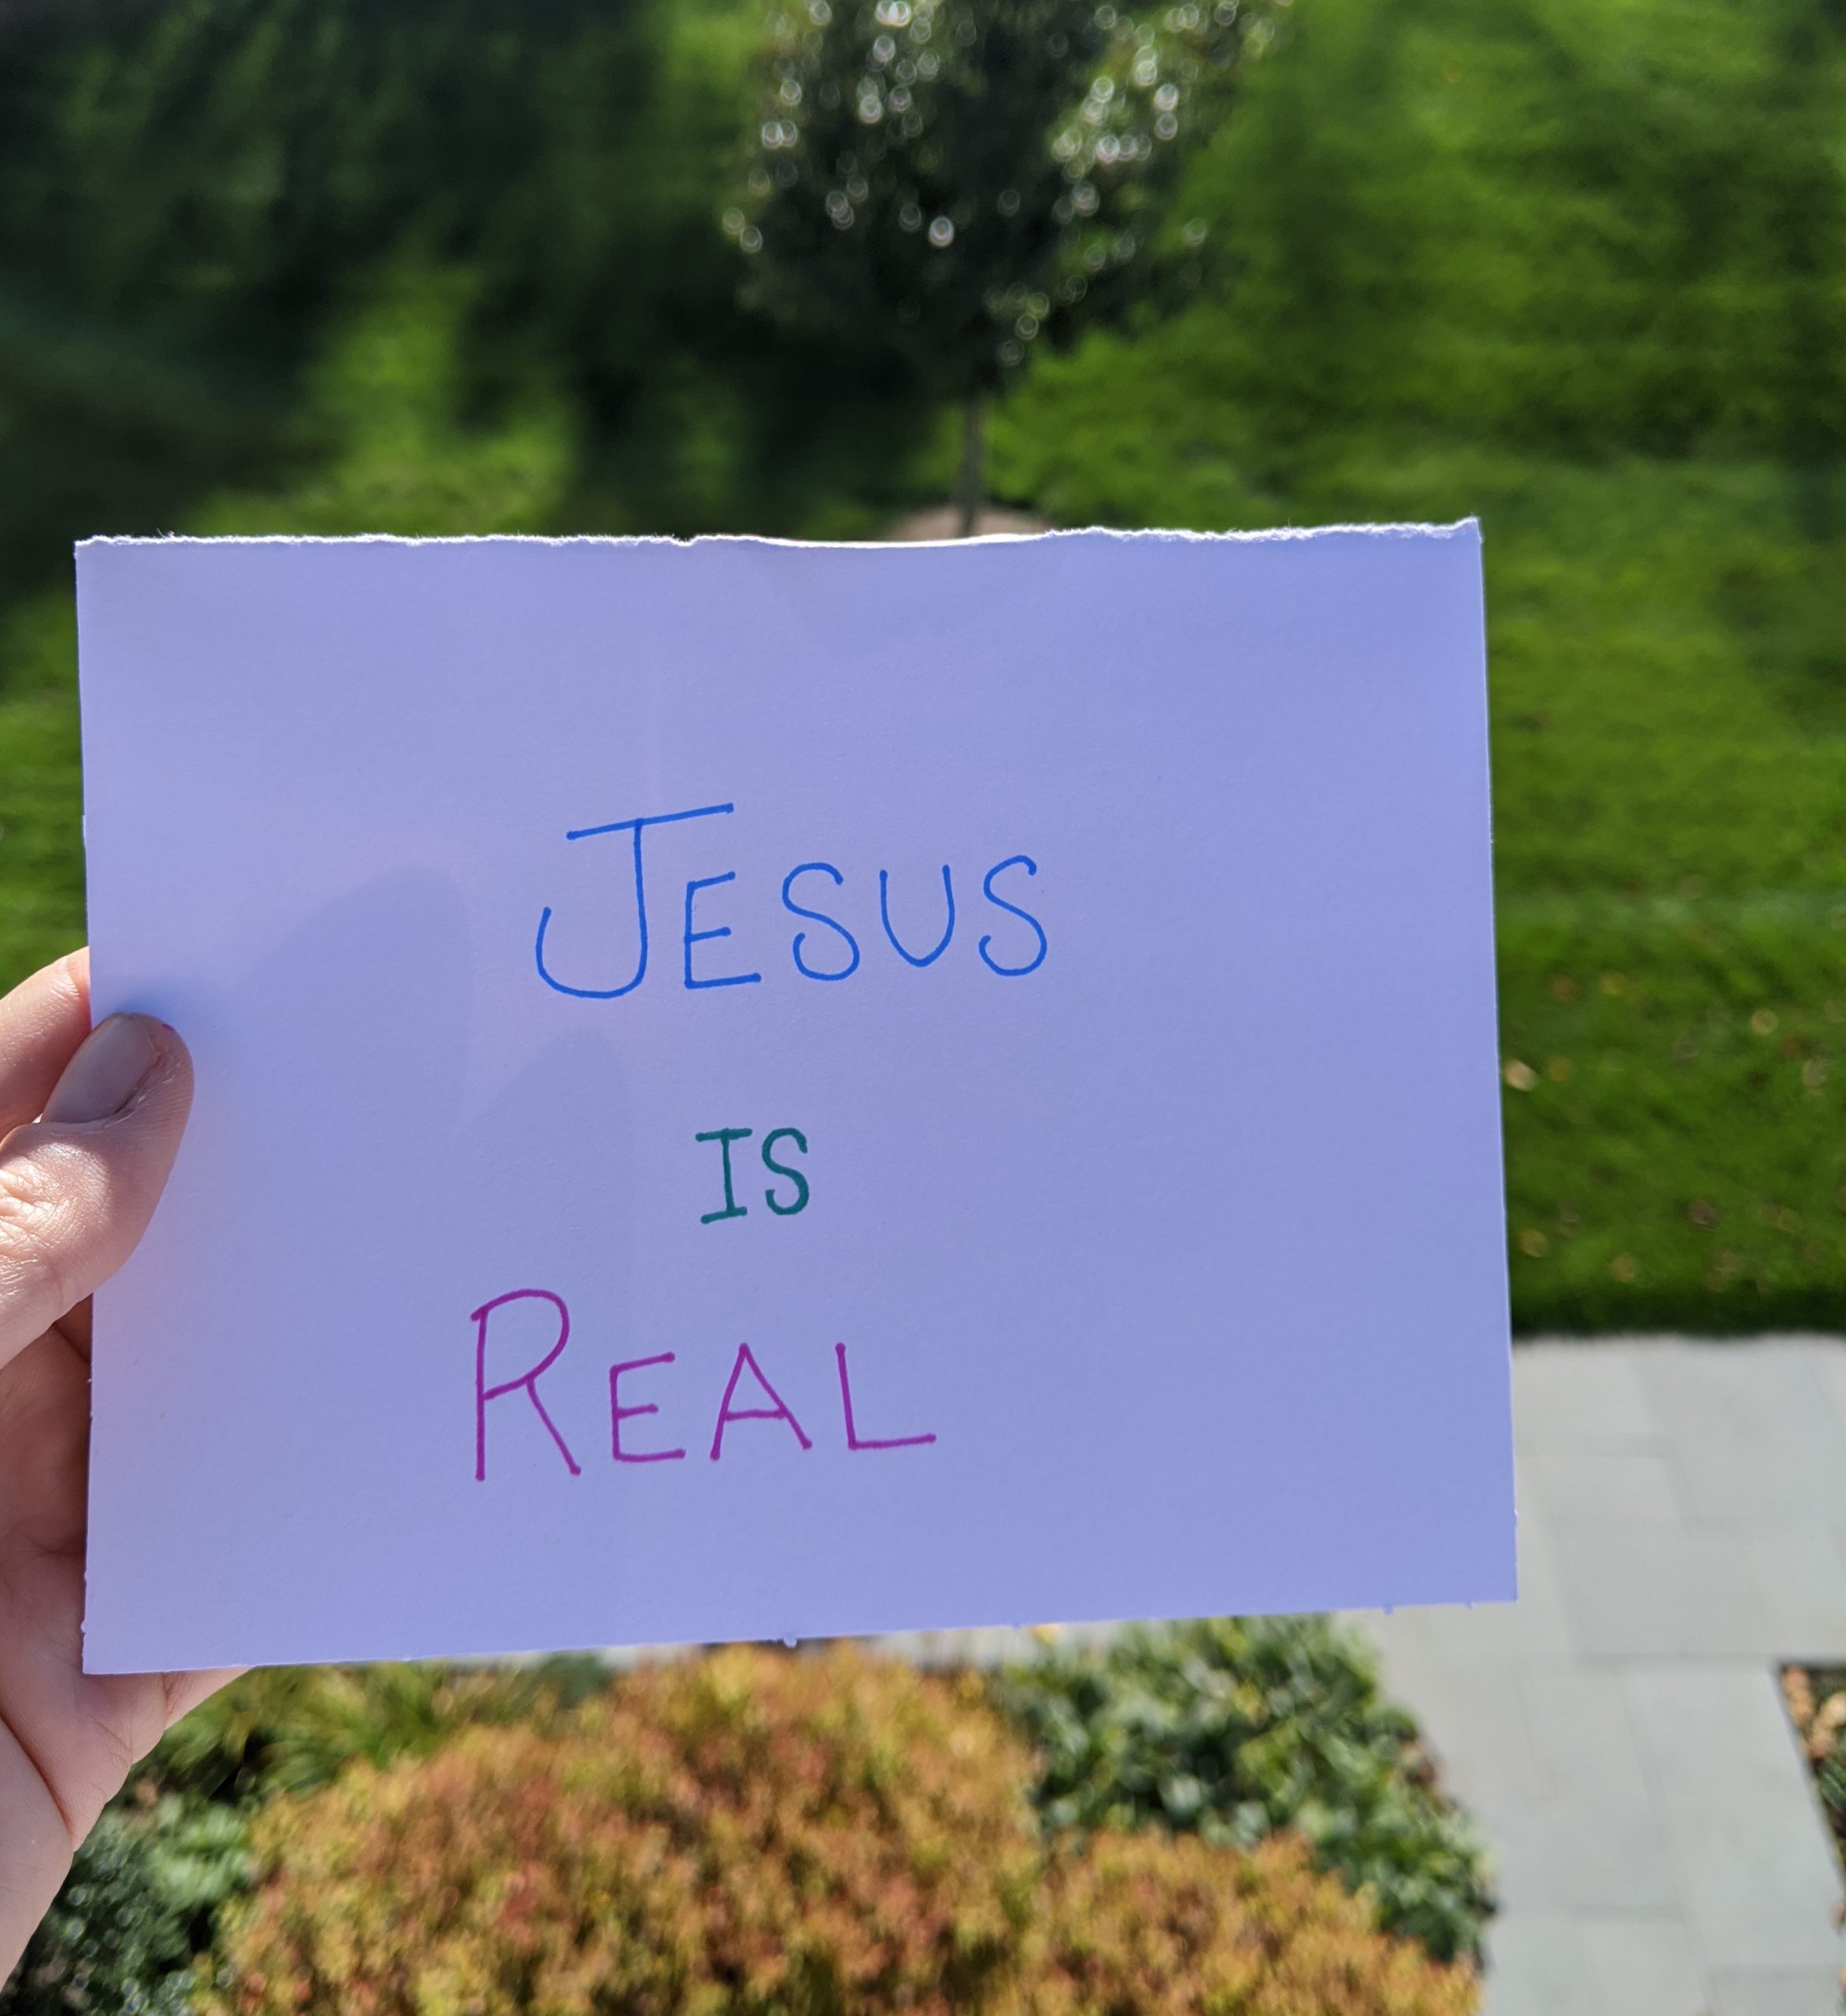 Jesus is real.